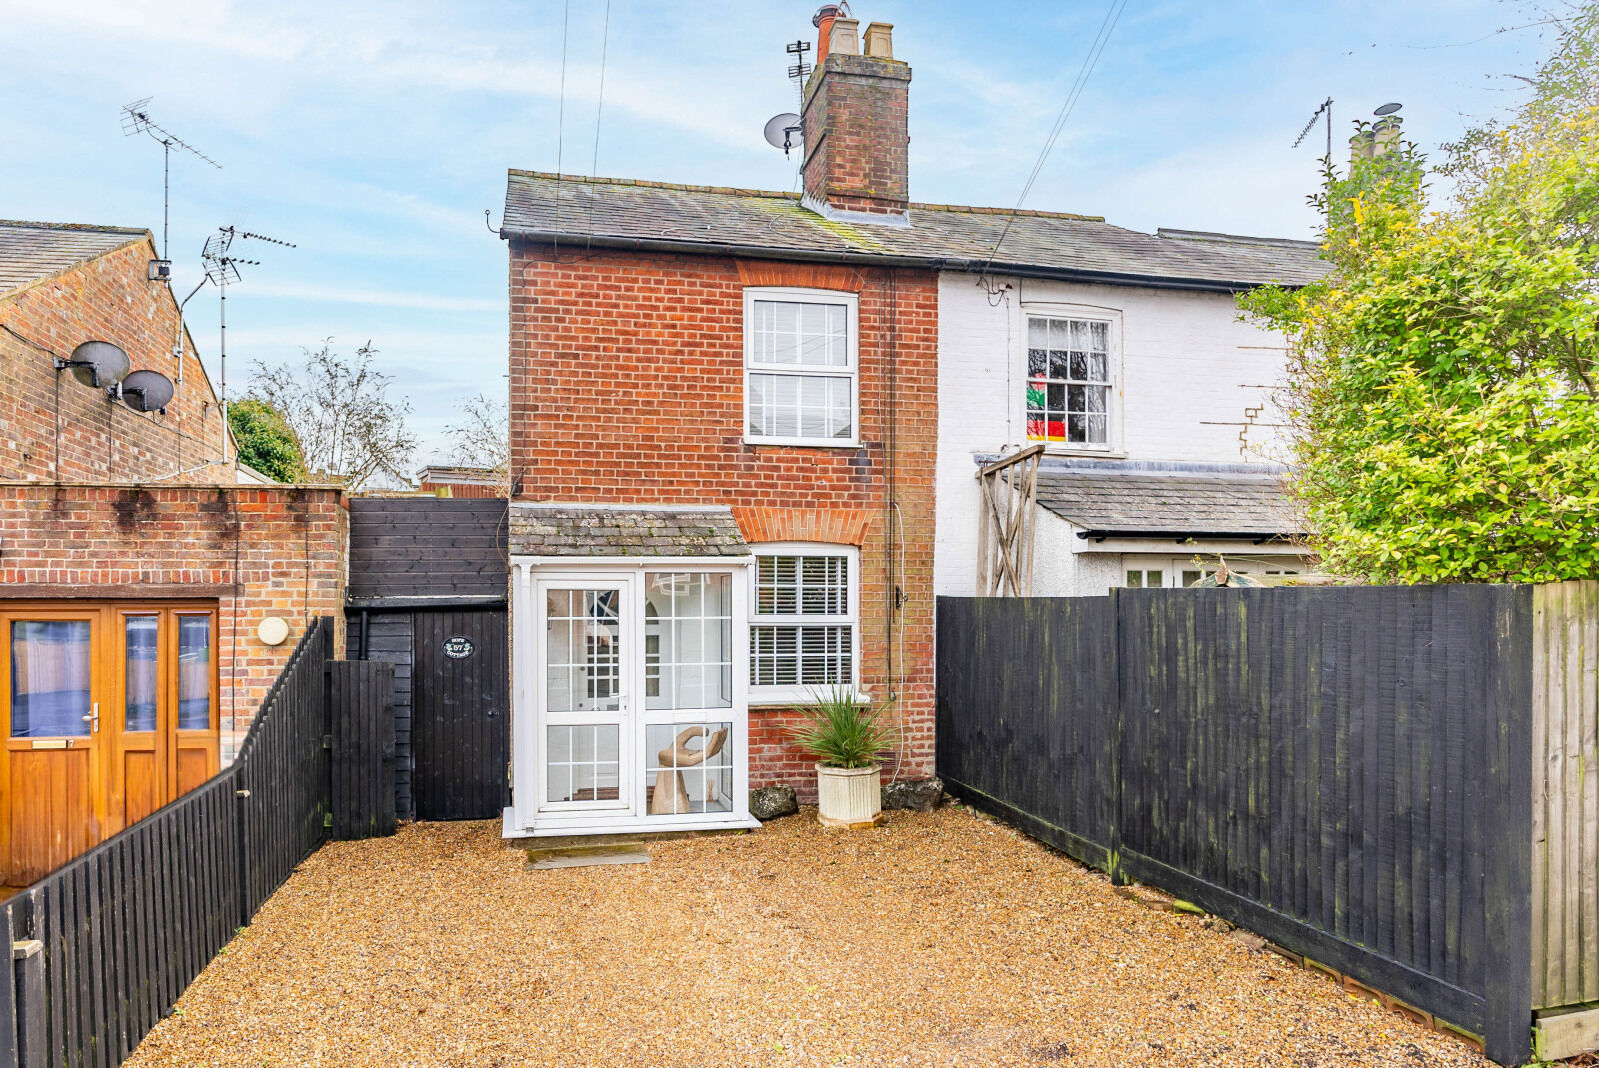 2 bedroom semi detached house for sale Brewhouse Hill, Wheathampstead, AL4, main image